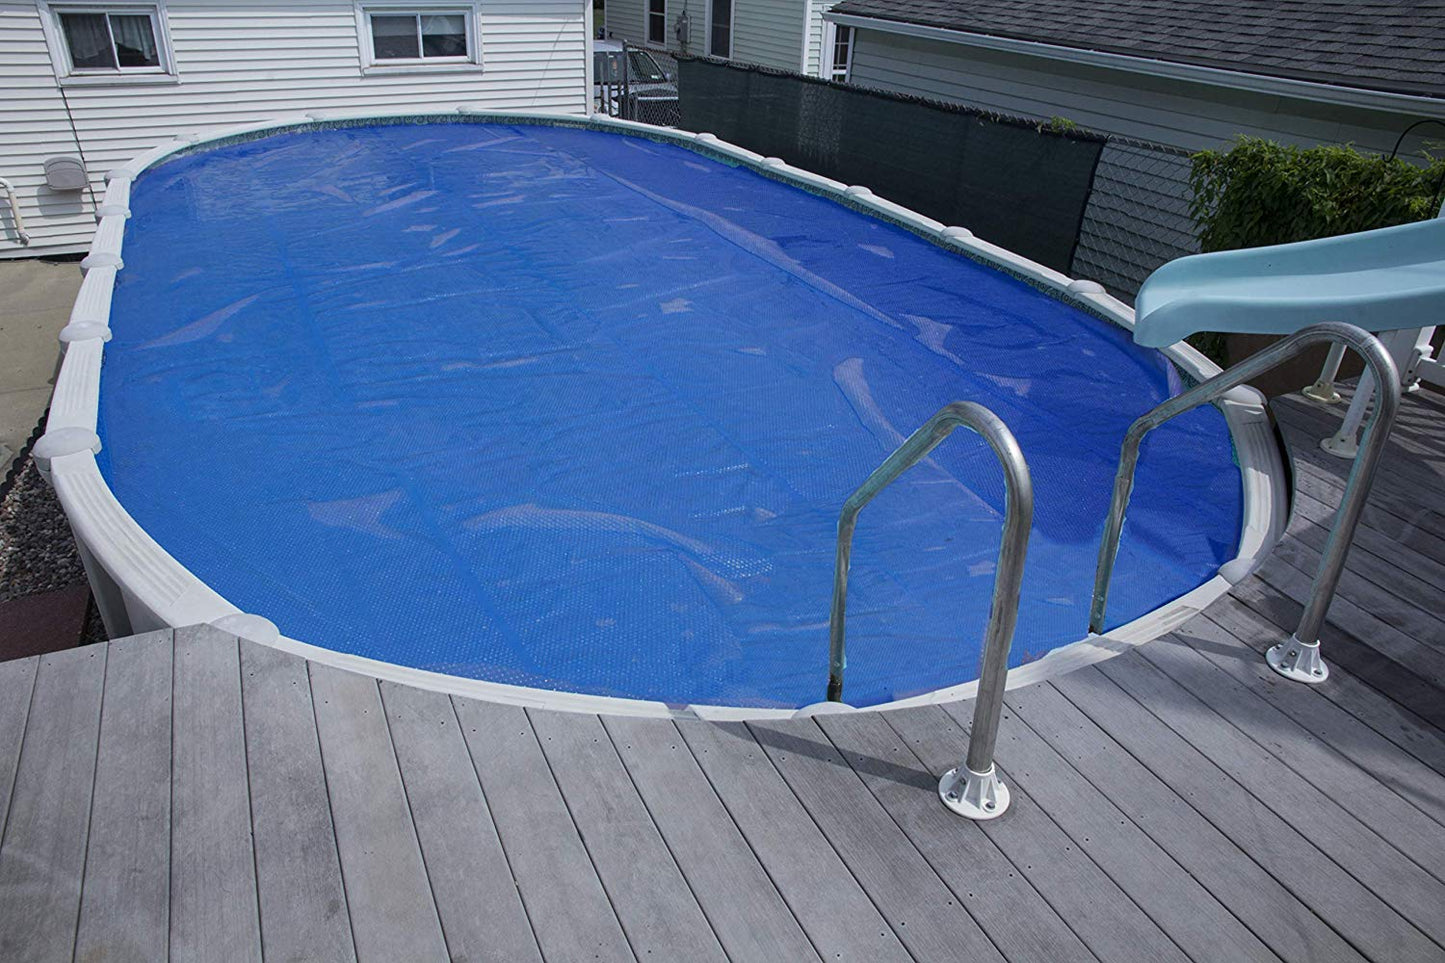 Sun2Solar Blue 18-Foot-by-33-Foot Oval Solar Cover | 1200 Series | Heat Retaining Blanket for In-Ground and Above-Ground Oval Swimming Pools | Use Sun to Heat Pool Water | Bubble-Side Facing Down 18' x 33' Oval